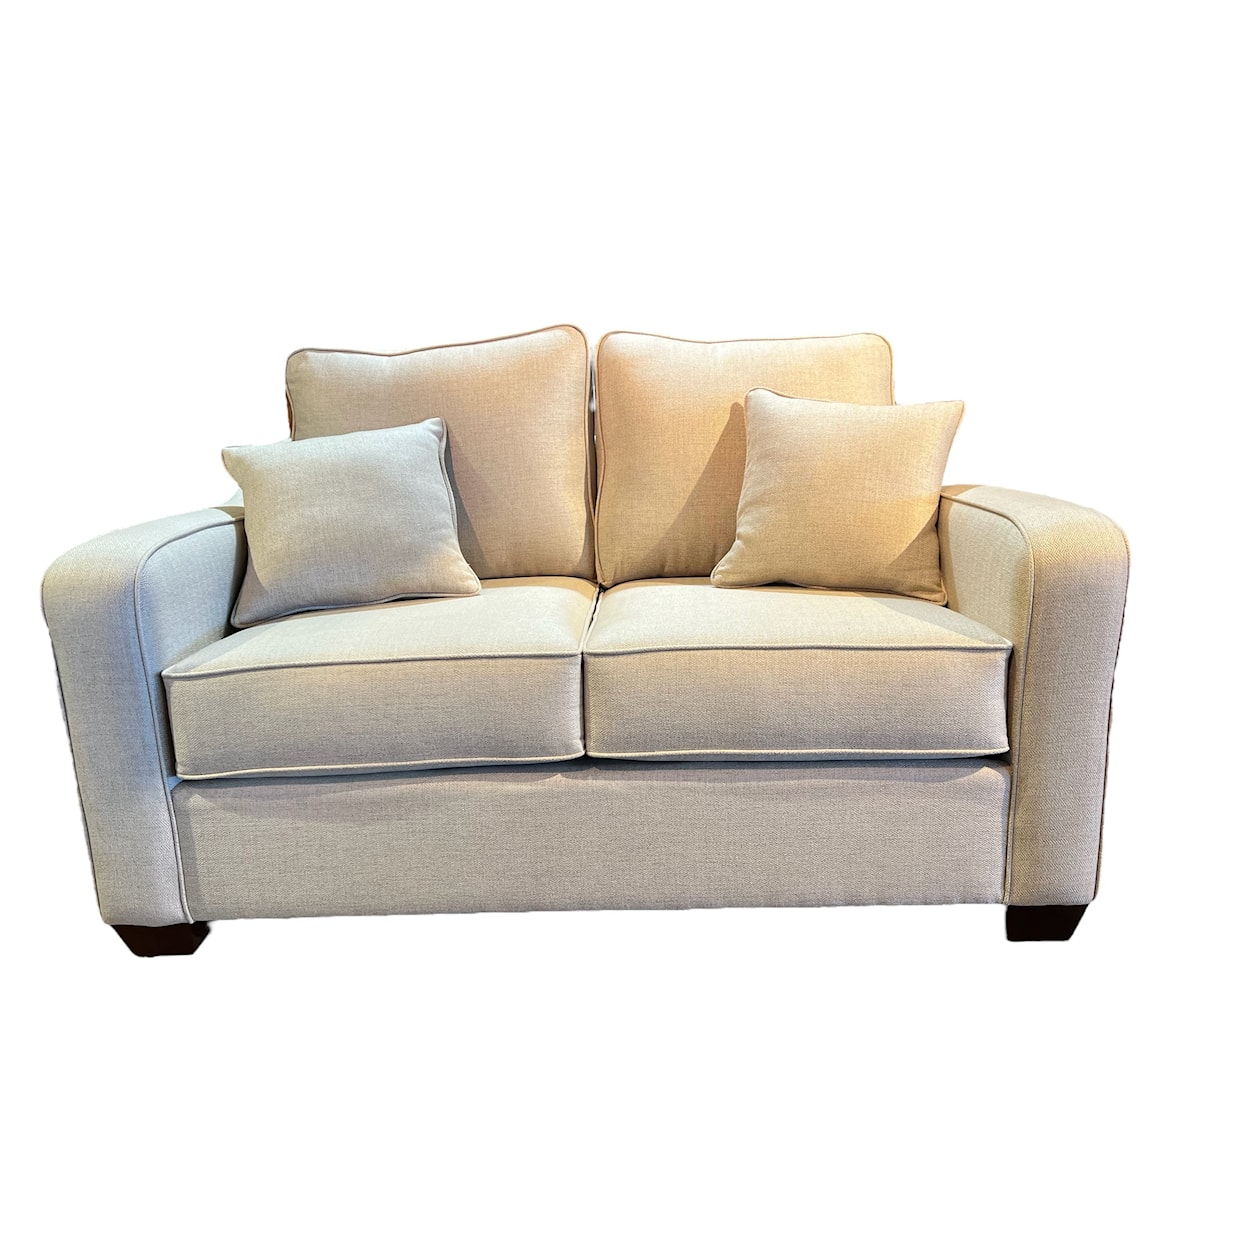 Sussex Upholstery Co. Stacy Stacy Loveseat